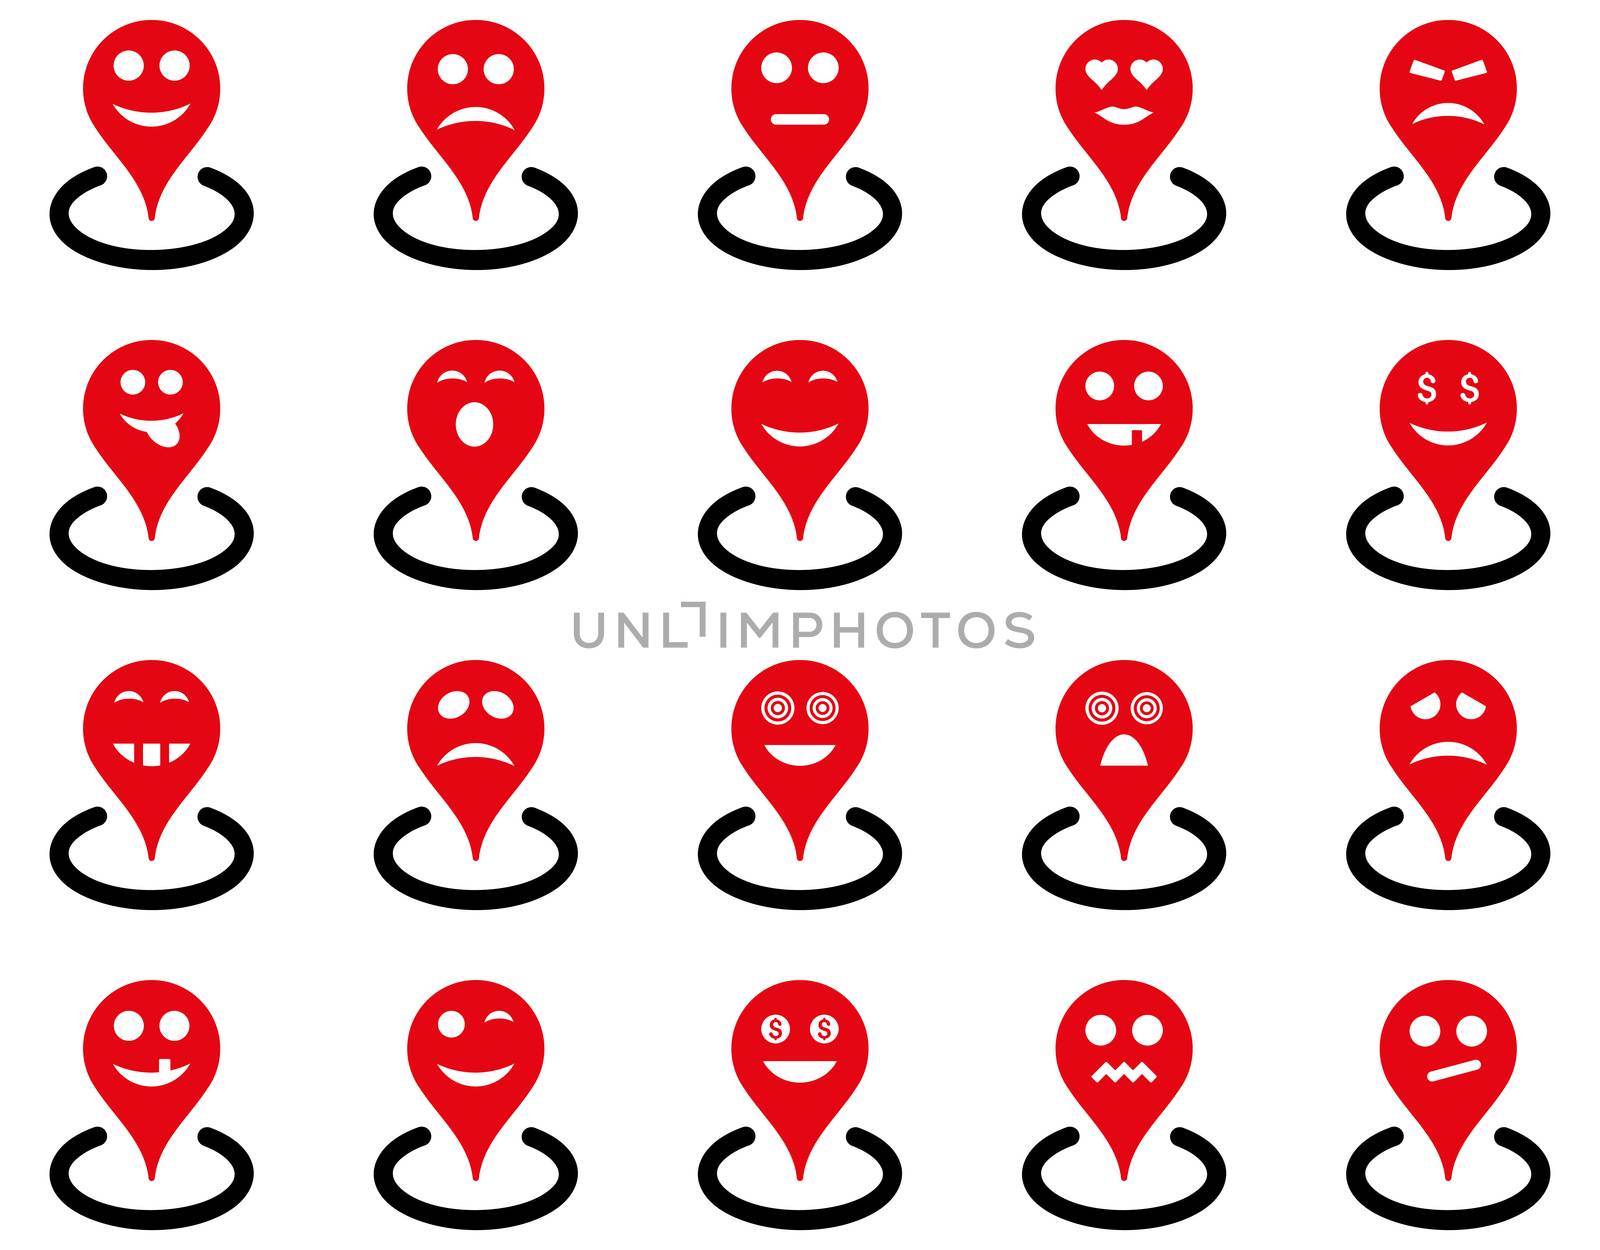 Smiled location icons by ahasoft